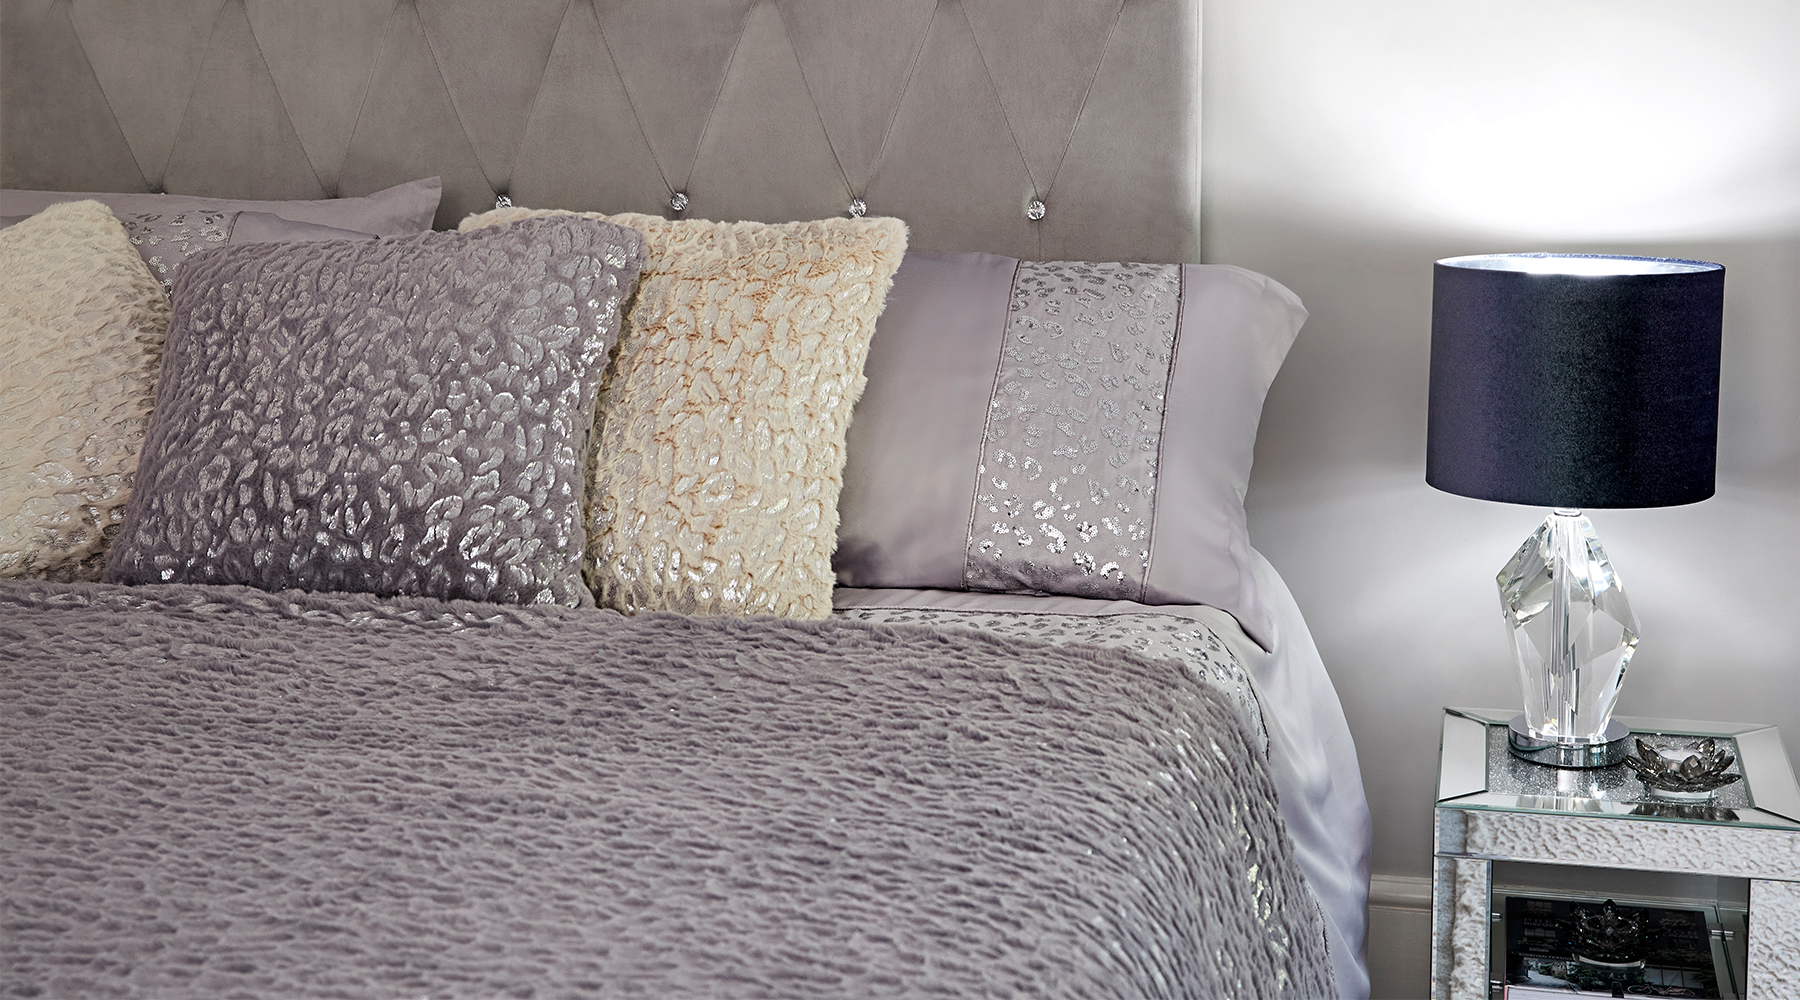 Sequin patterned bedding and a bedside lamp